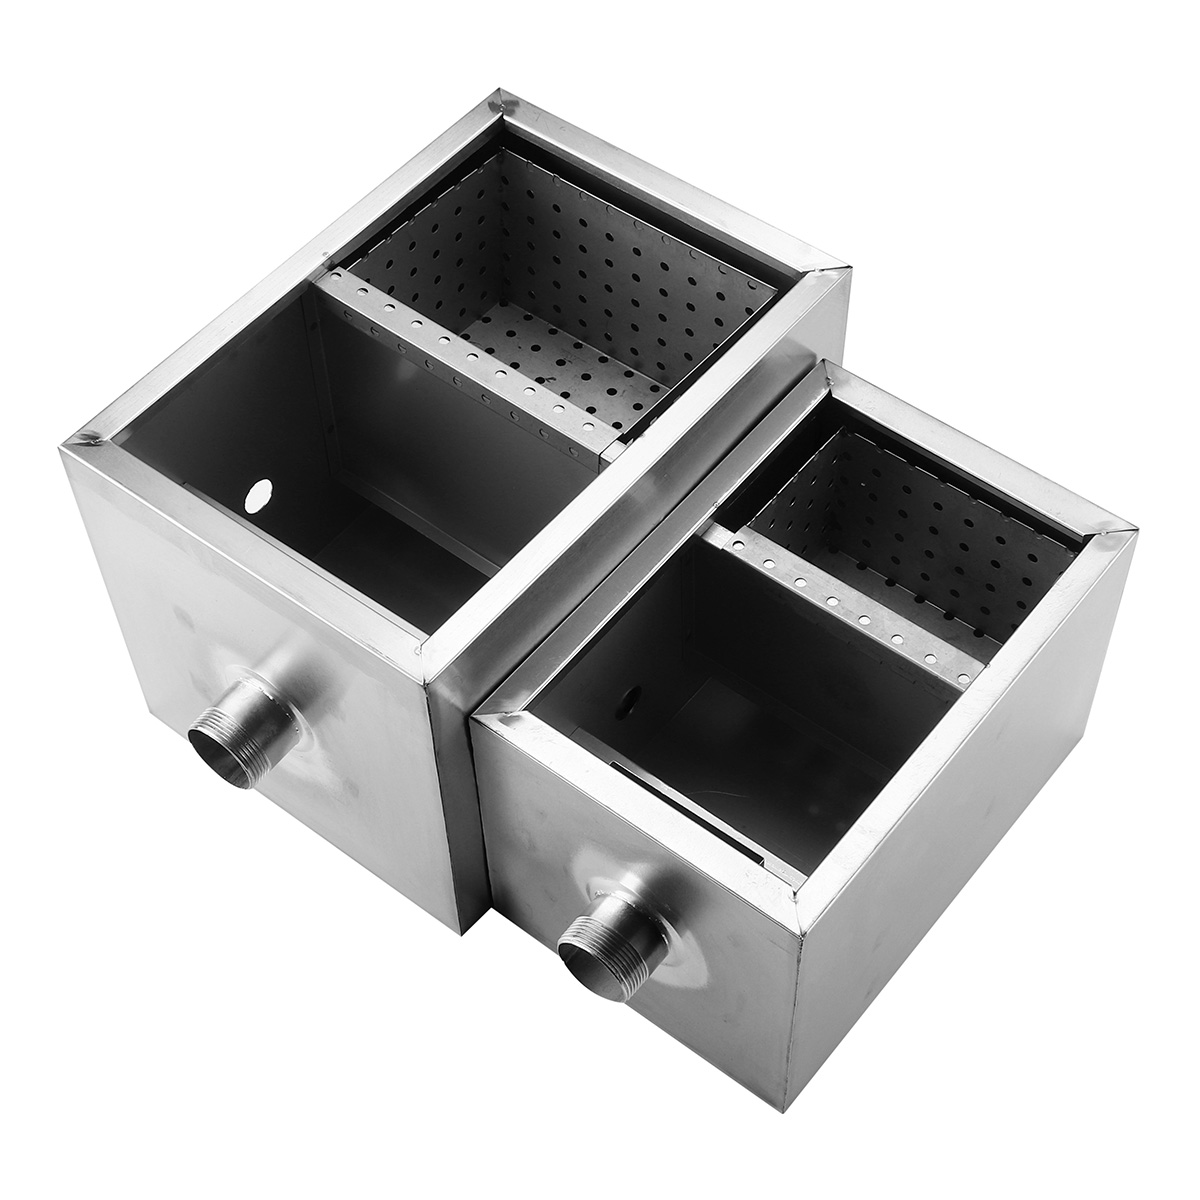 Commercial-Stainless-Steel-Grease-Trap-Interceptor-Set-for-Restaurant-Wastewater-1384838